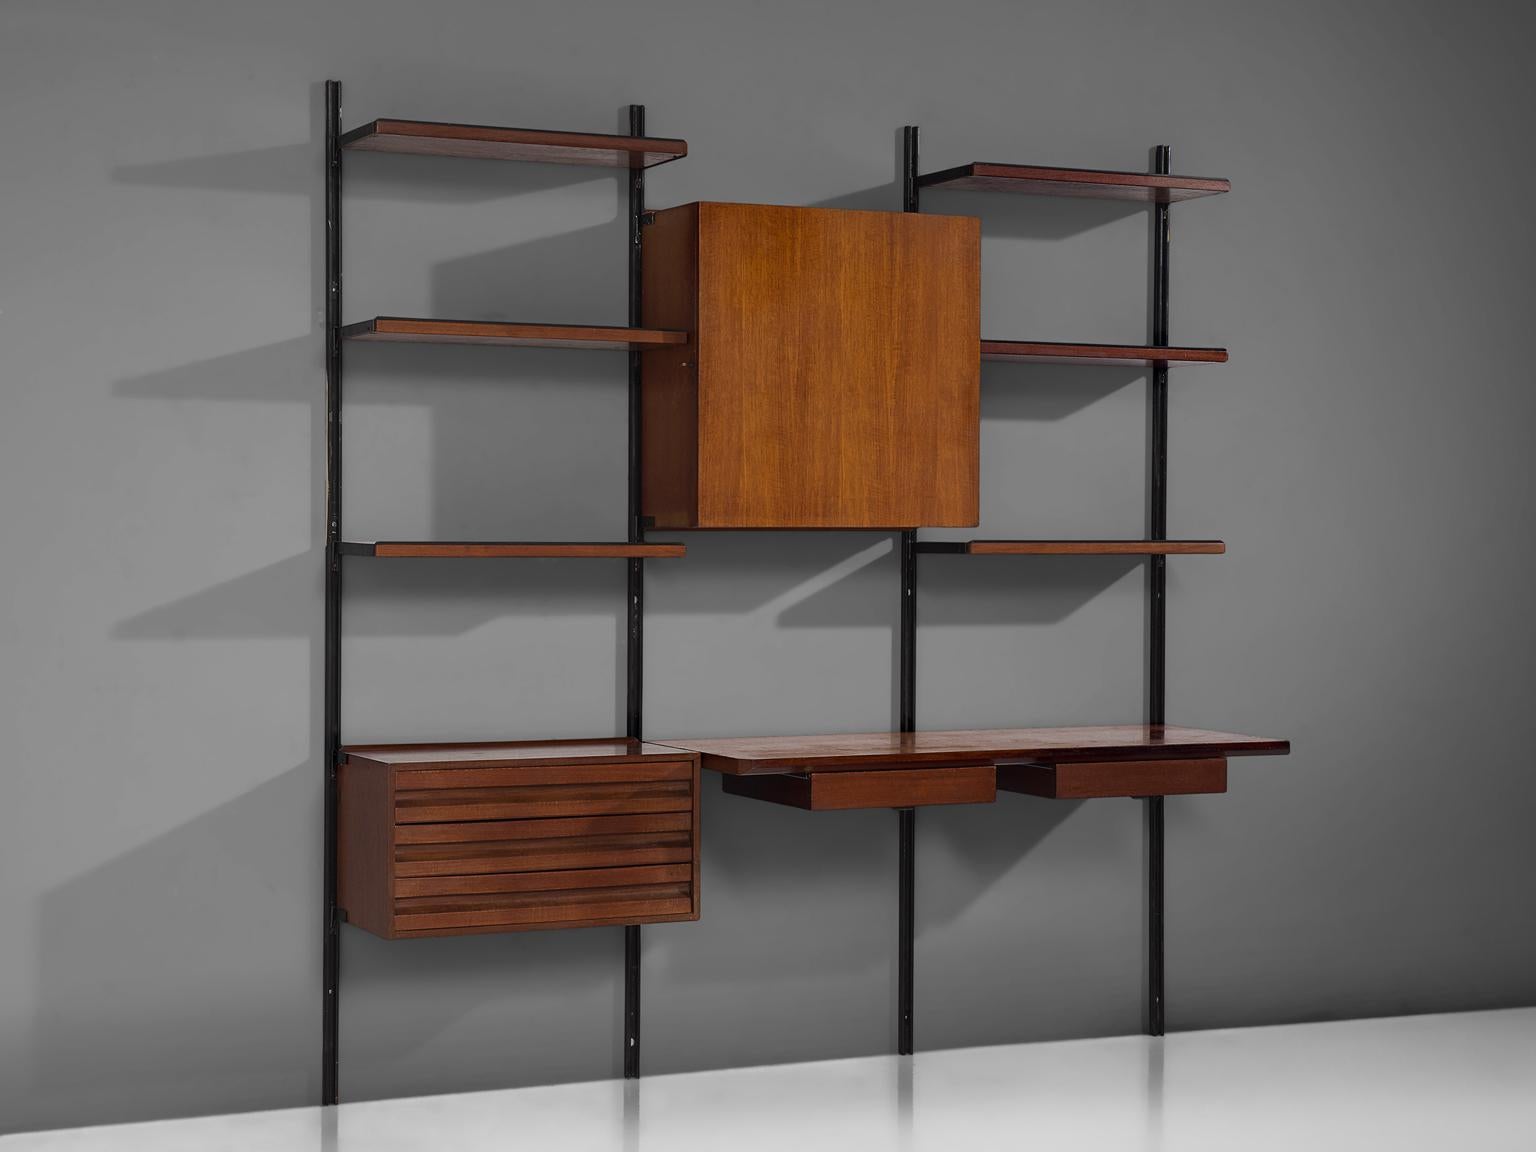 Osvaldo Borsani for Tecno, wall unit with desk, metal and teak, Italy, 1950s.

This wall-mounted shelving unit of three sections can be used as a bookcase and a desk as well. The system was developed by Borsani as coordinated system for furnishing